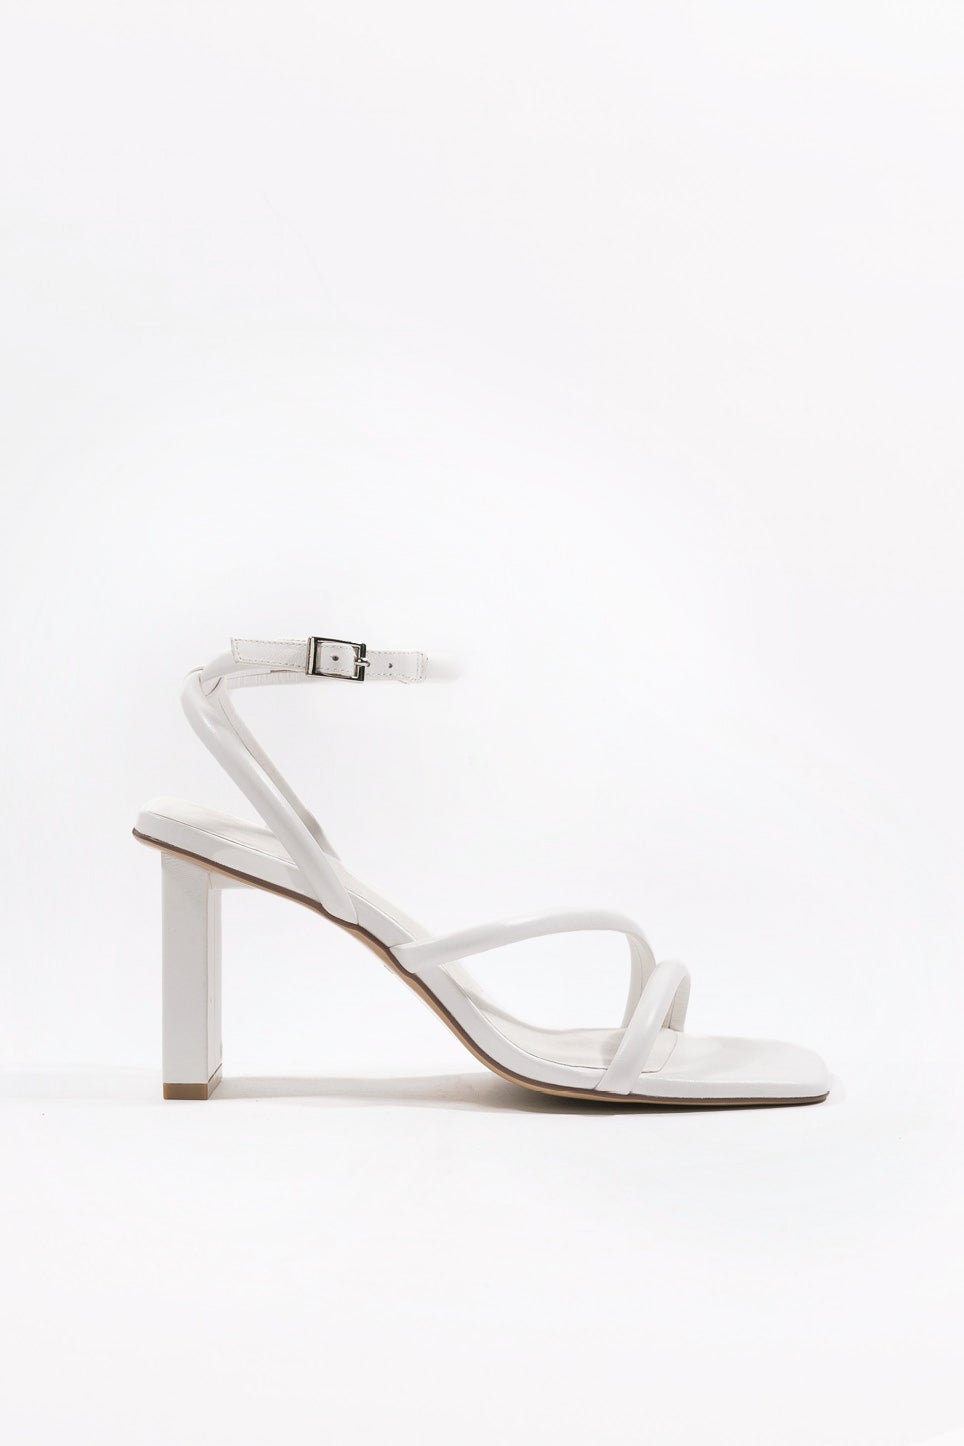 Zara Strappy Mid-Heel Leather Sandals | The 2019 Way of Wearing Kitten Heels  and Where to Buy Them | POPSUGAR Fashion UK Photo 53